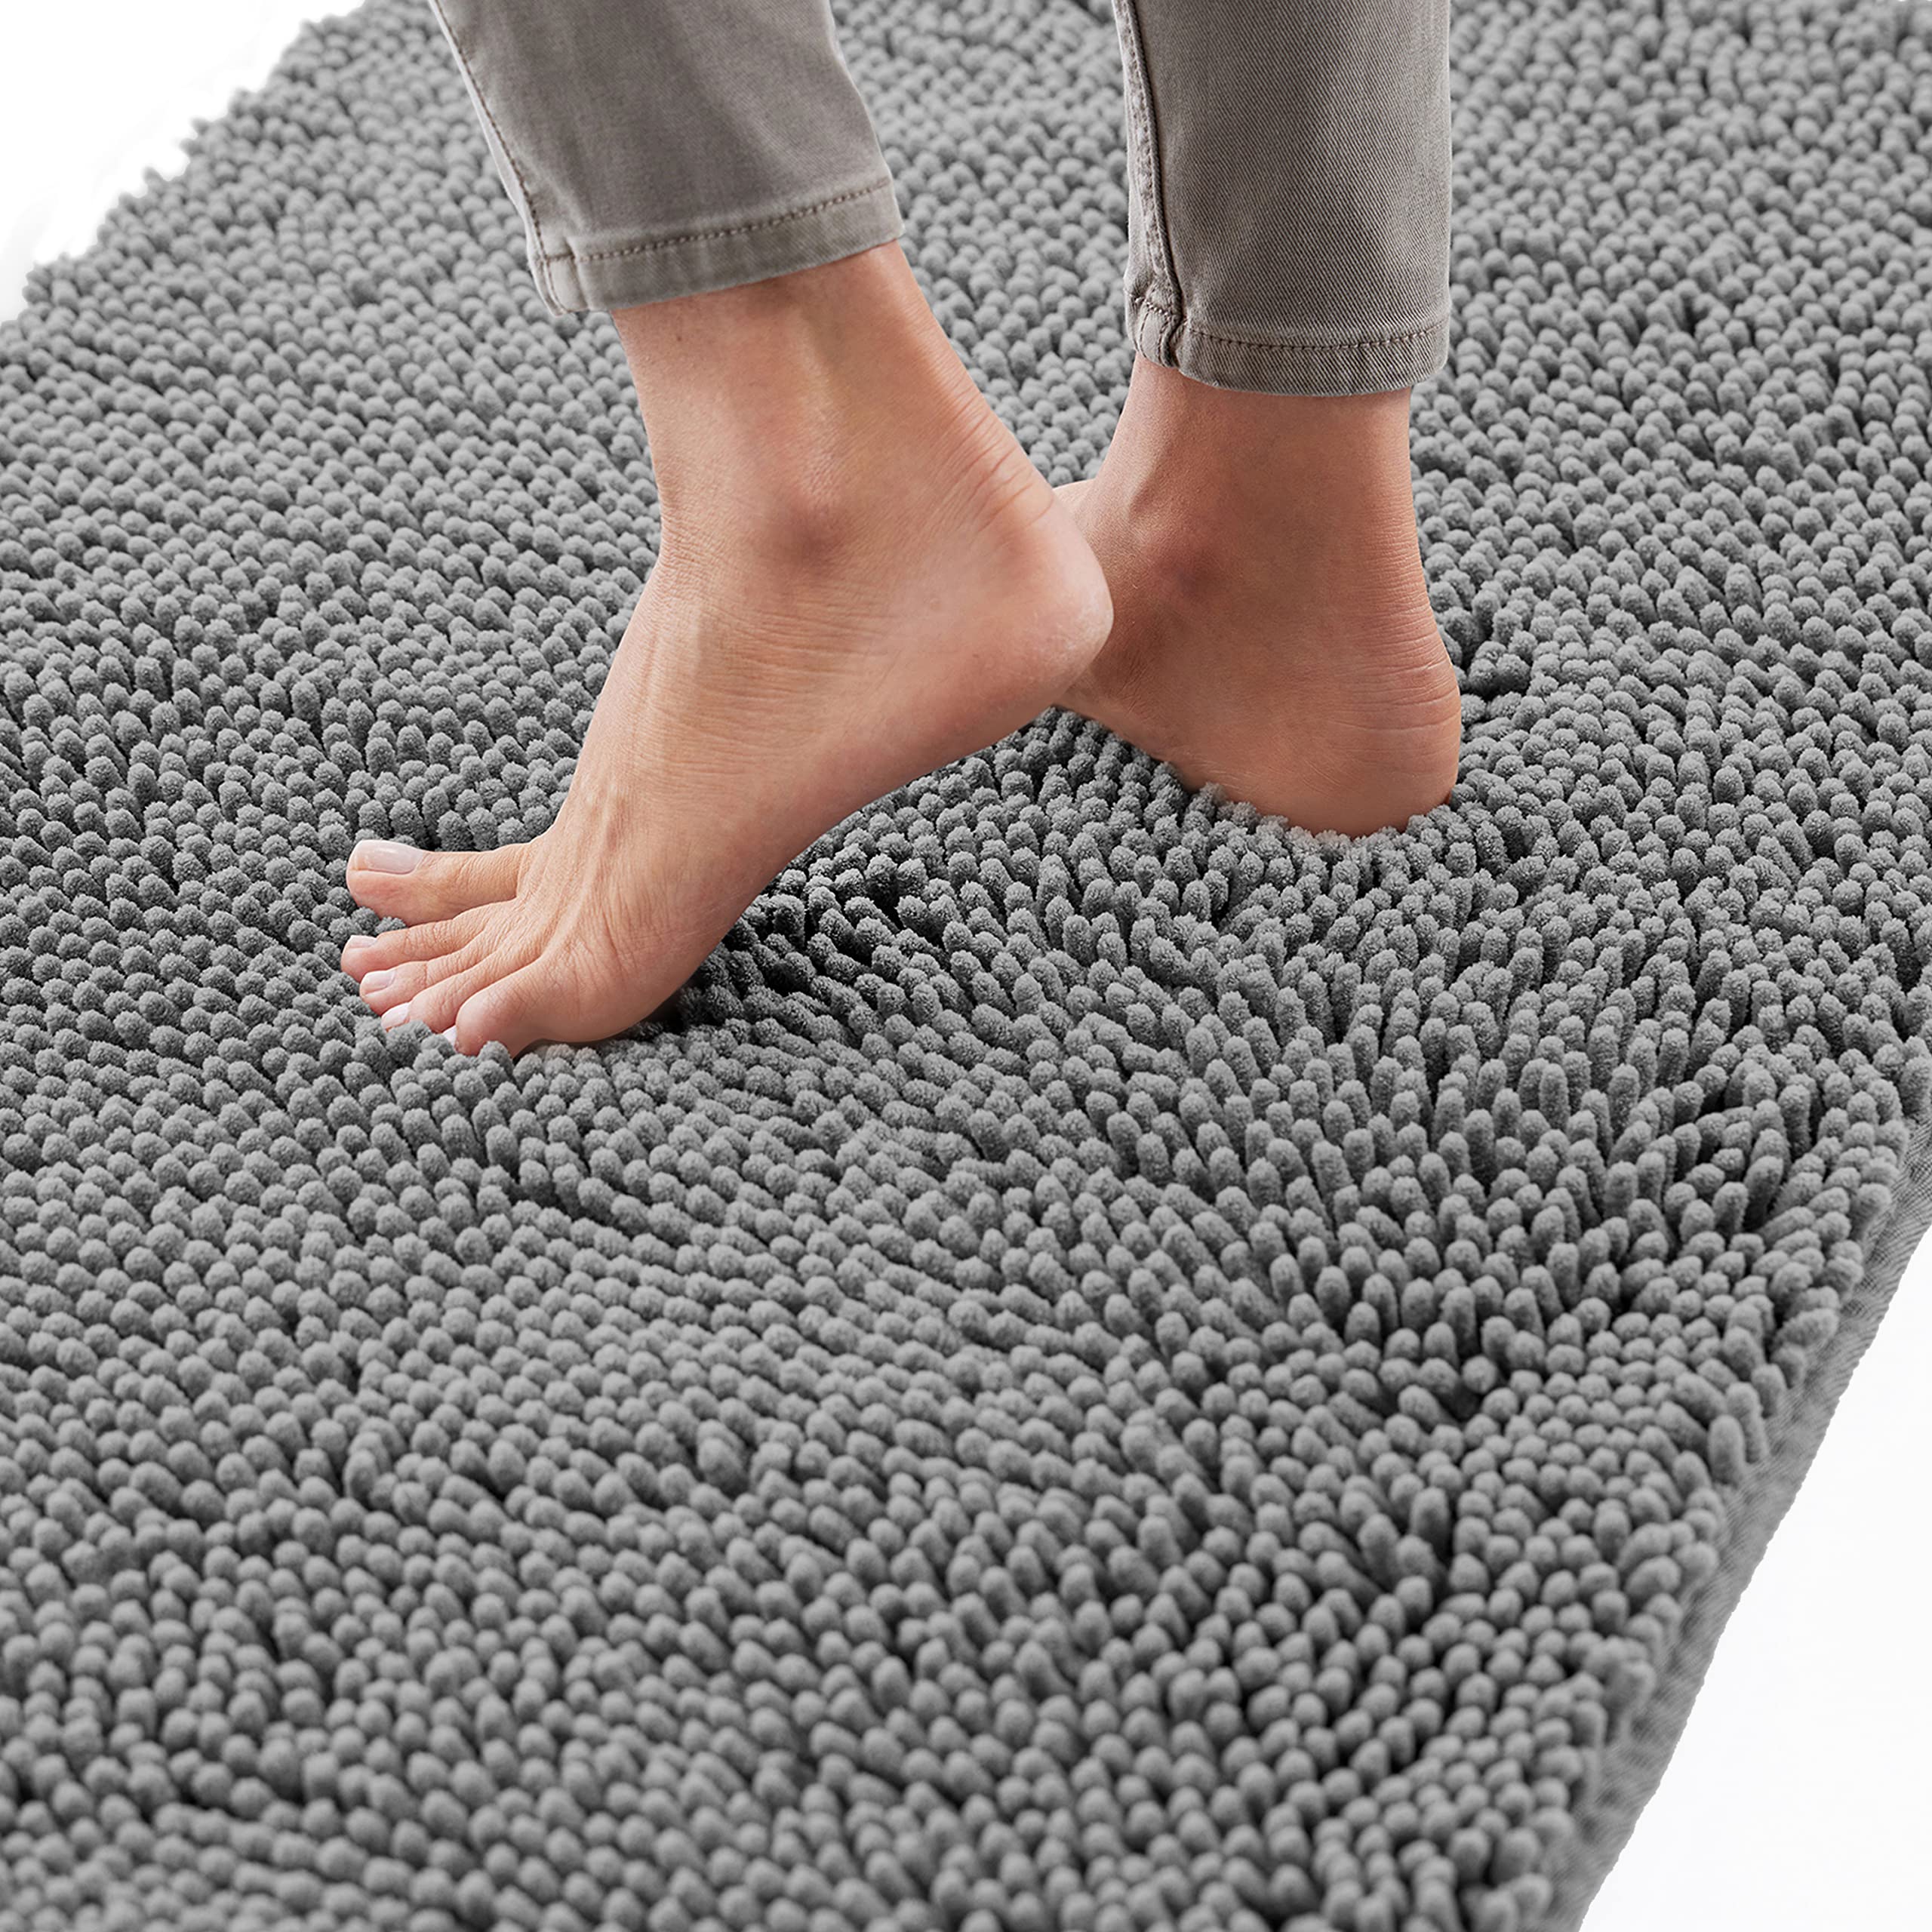 Gorilla Grip Bath Rug 24x17, Thick Soft Absorbent Chenille, Rubber Backing Quick Dry Microfiber Mat $5.34 free s/h with prime